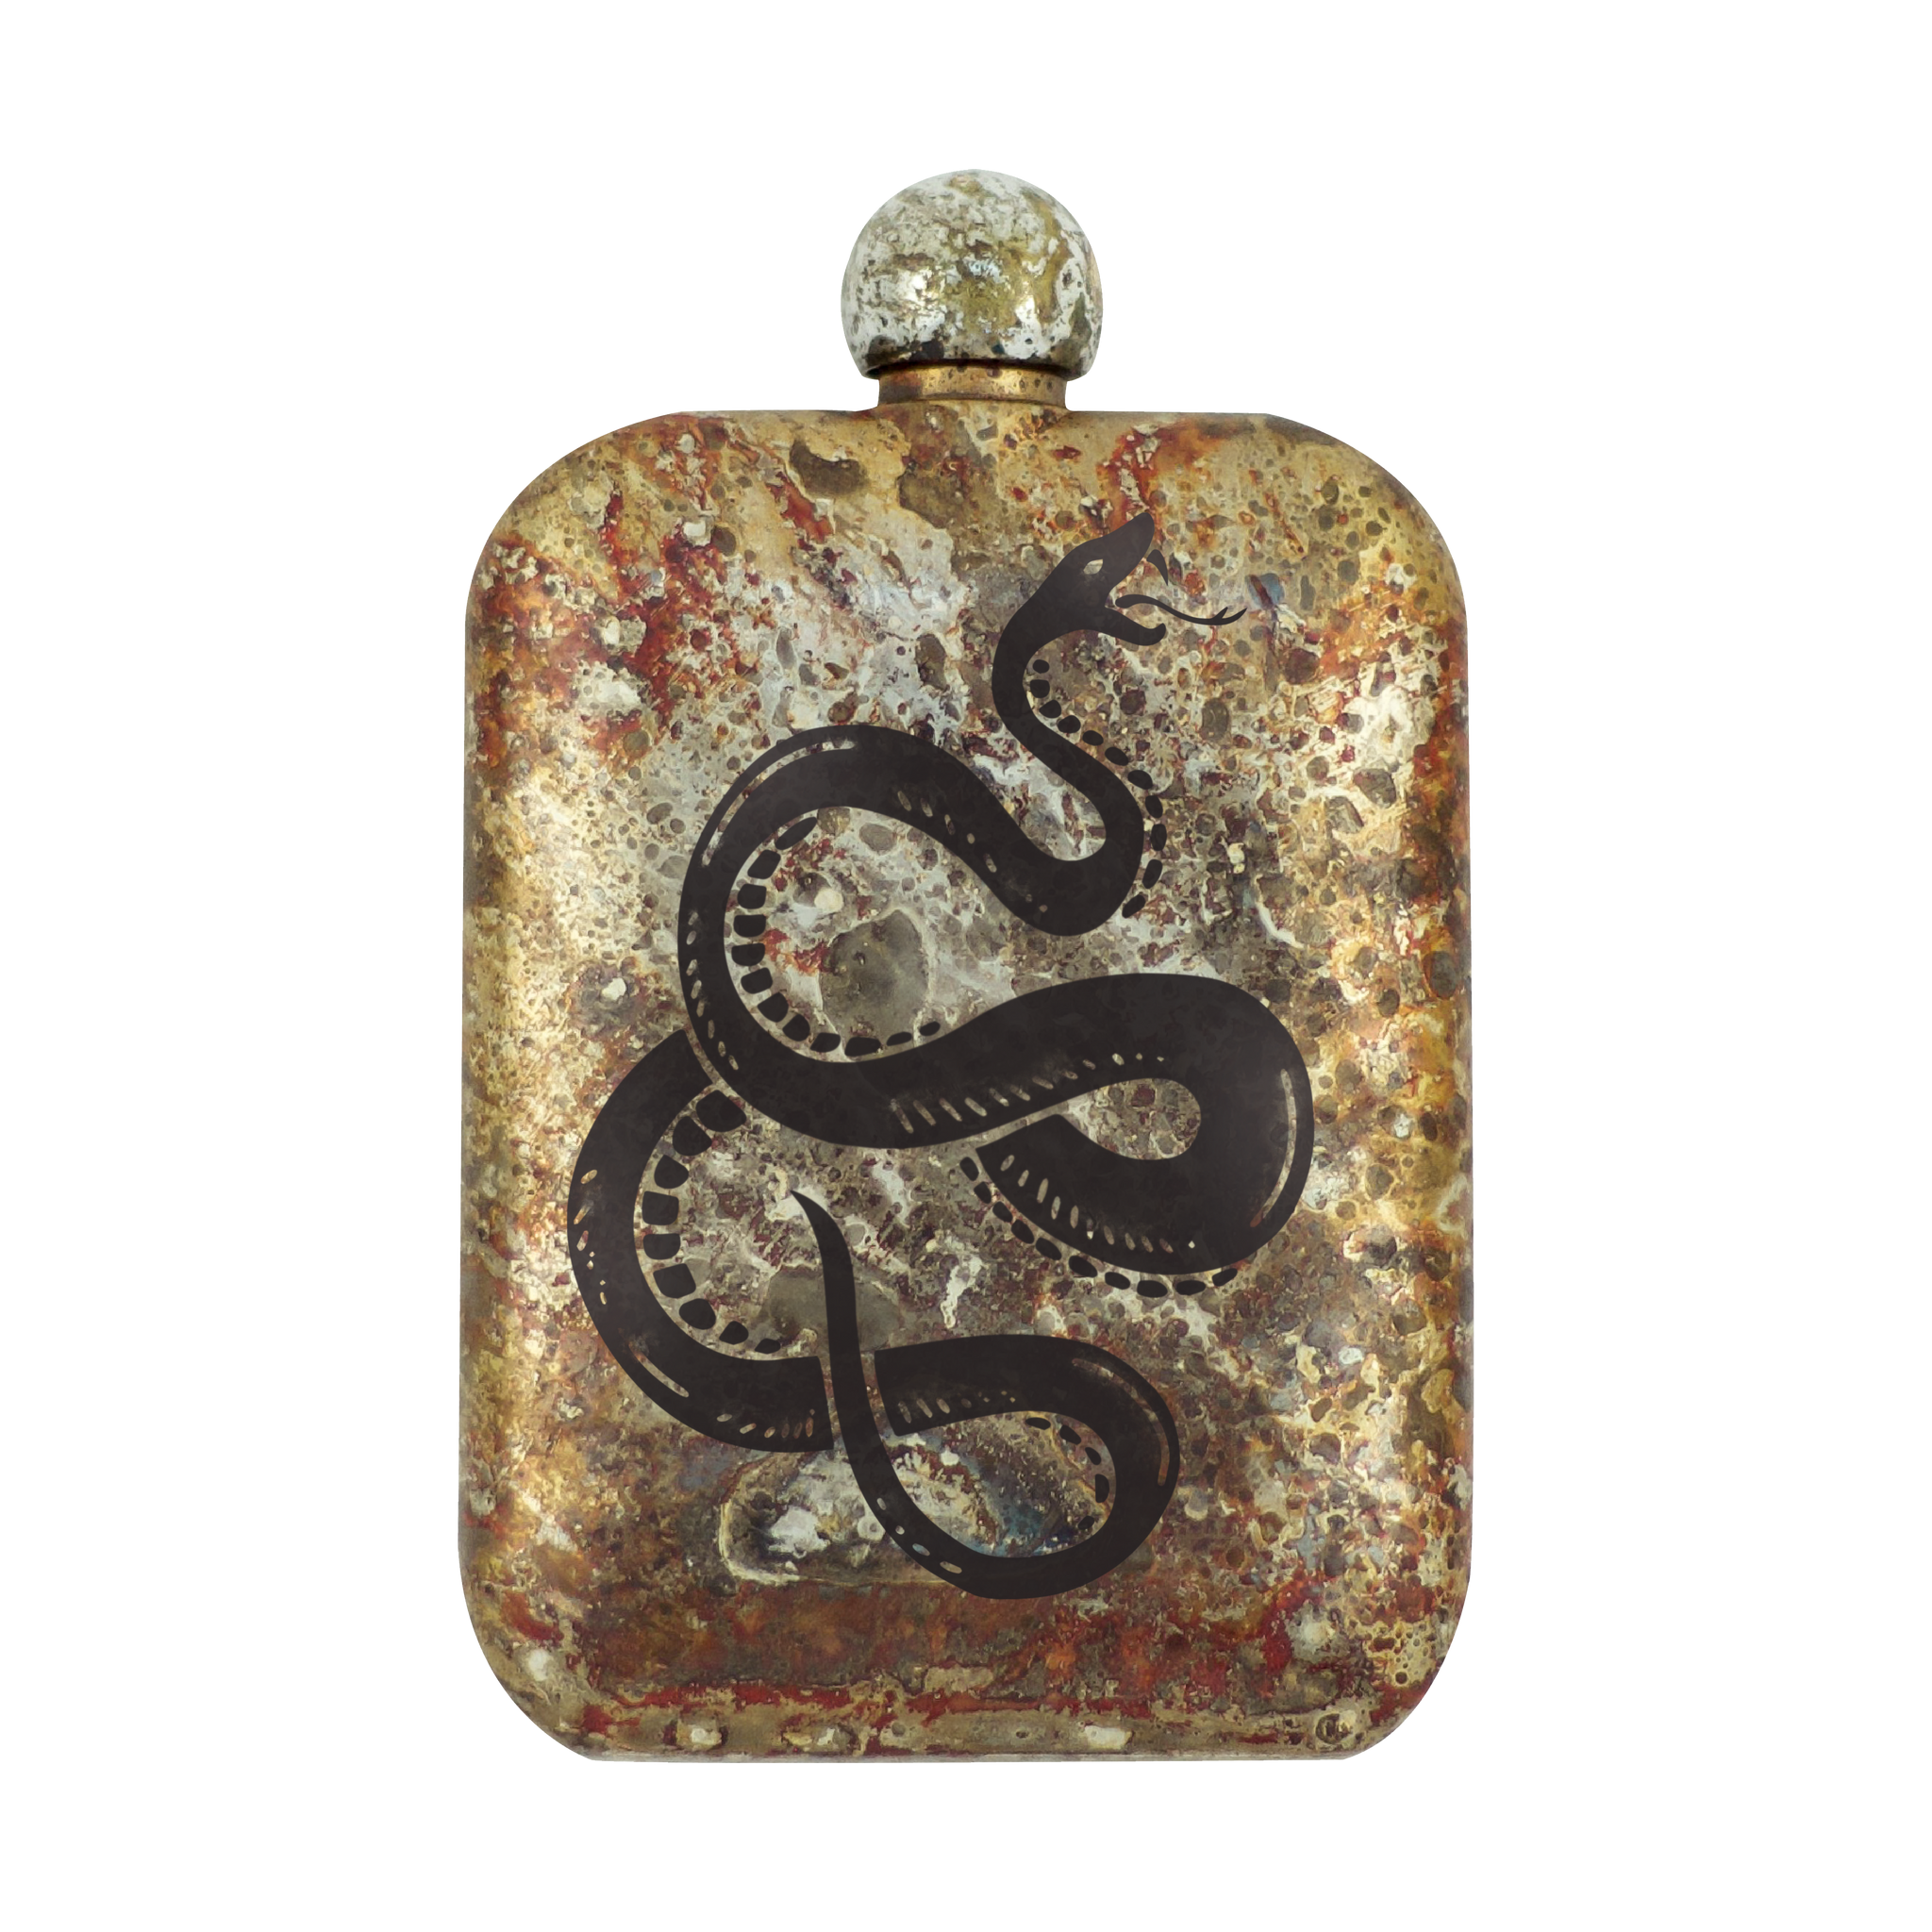 DEATH ADDER NOBLE FLASK by The Sneerwell